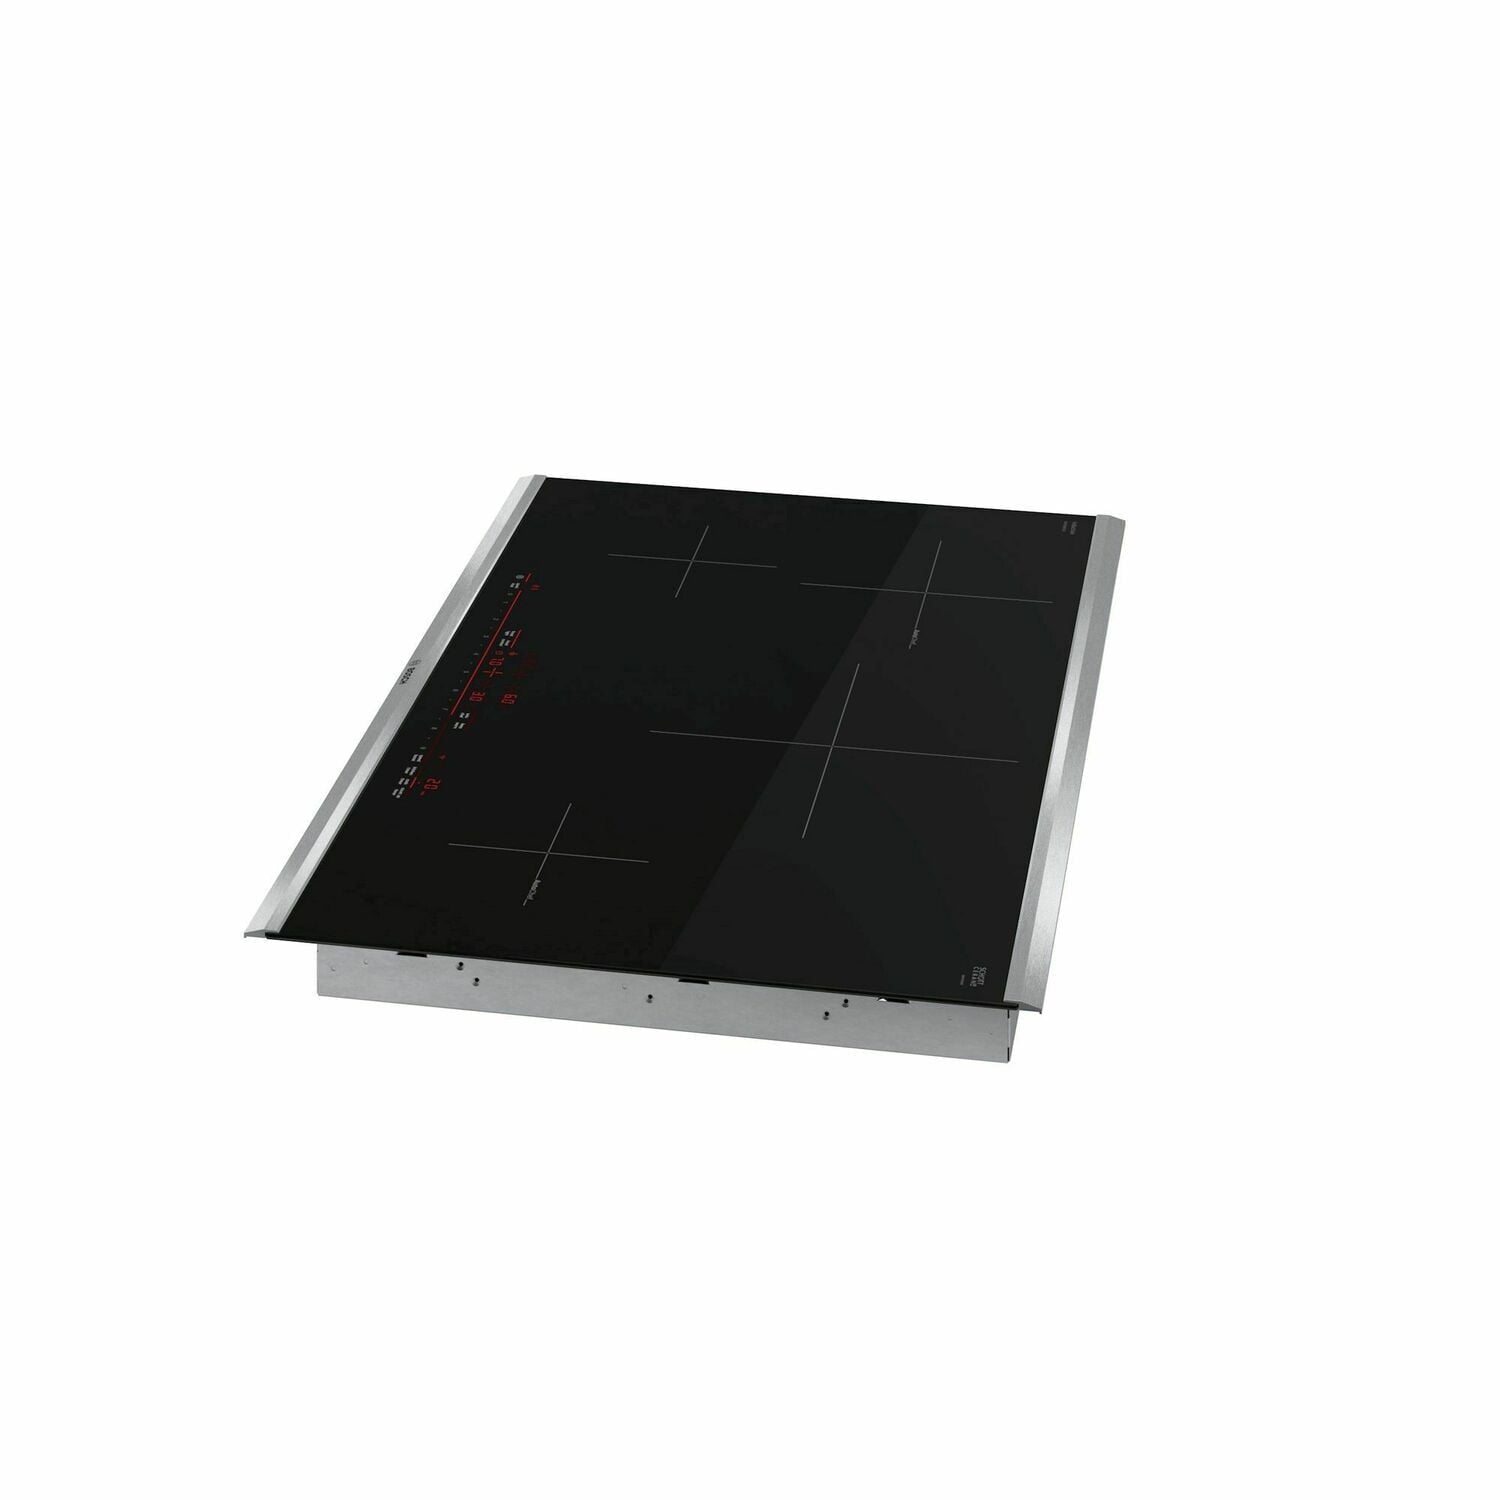 Bosch NIT8069SUC 800 Series Induction Cooktop 30'' Black Nit8069Suc